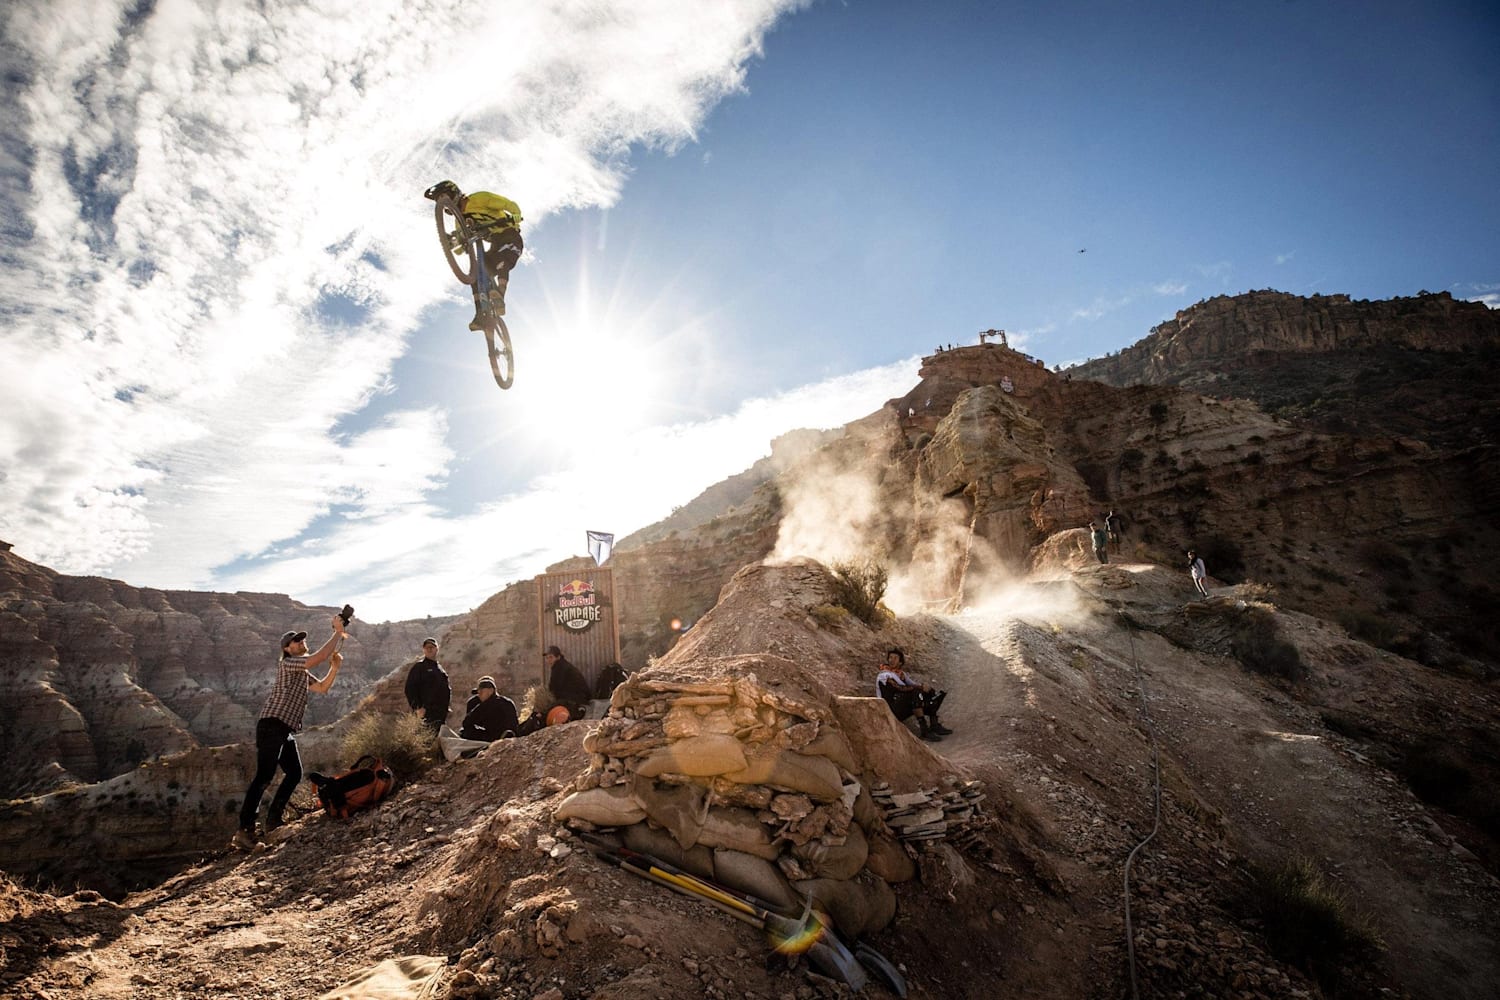 Check Out the Top 3 Runs From Red Bull Rampage 2017